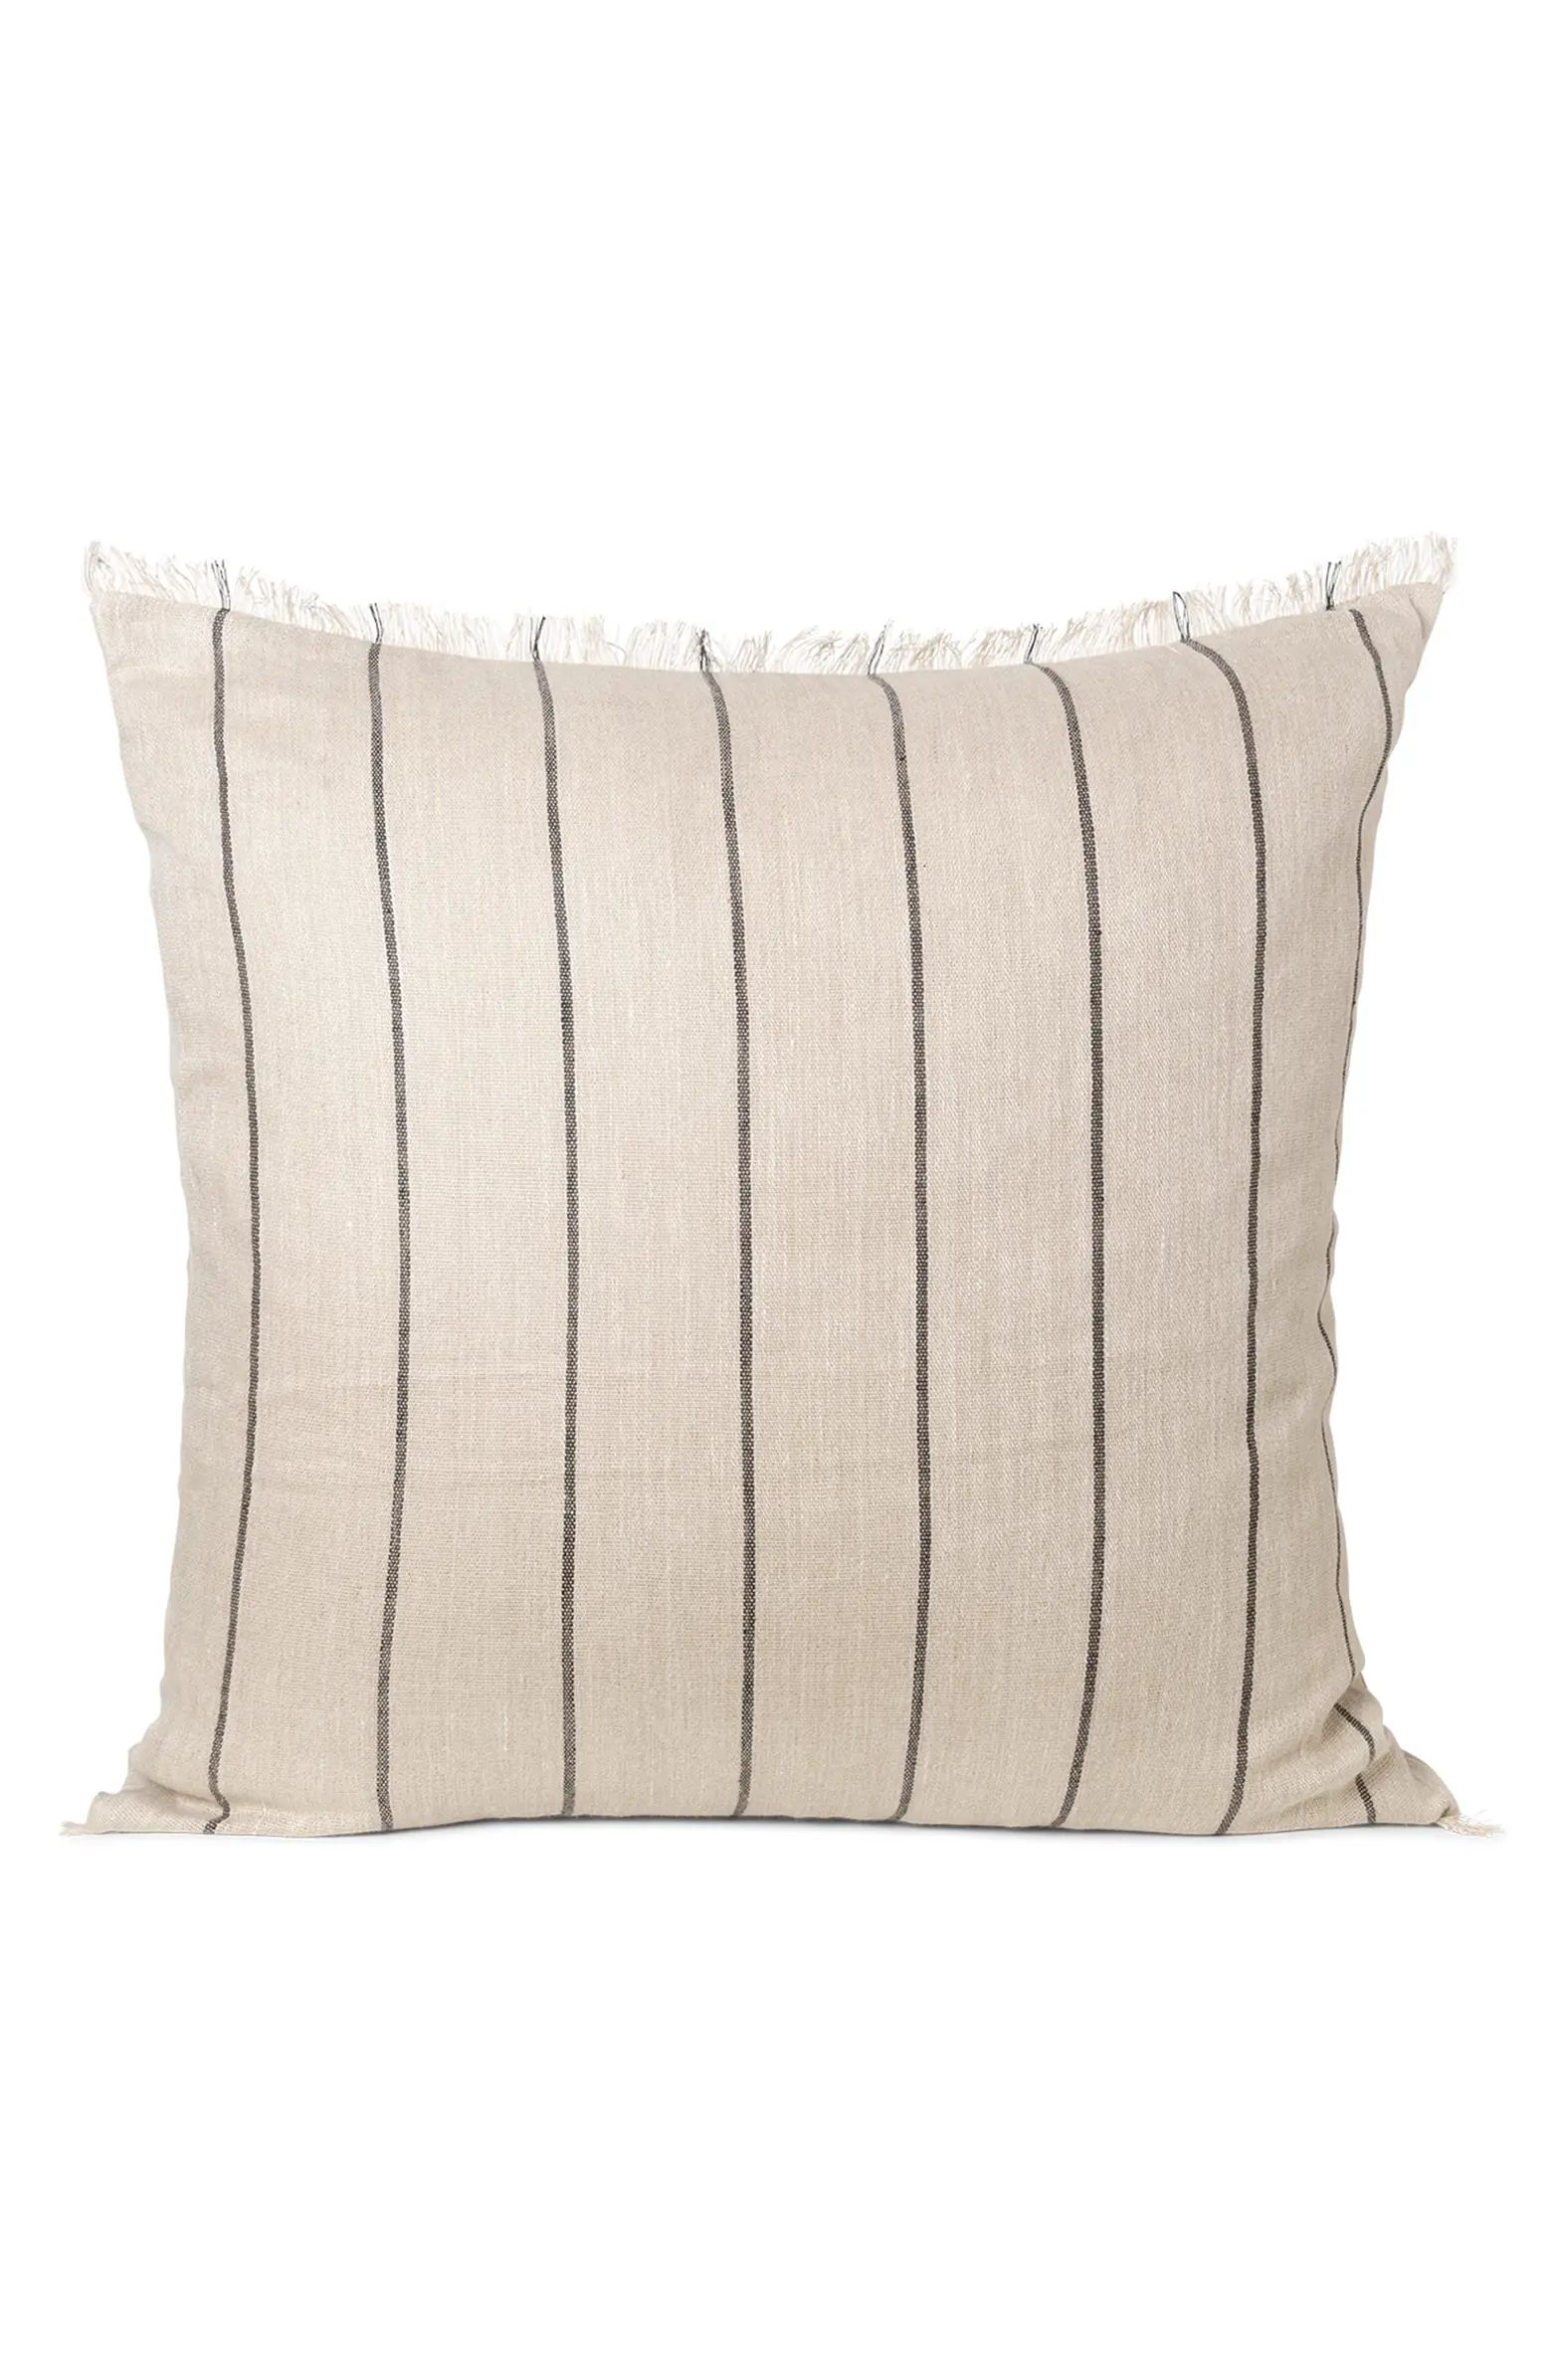 Large Calm Cushion | Nordstrom